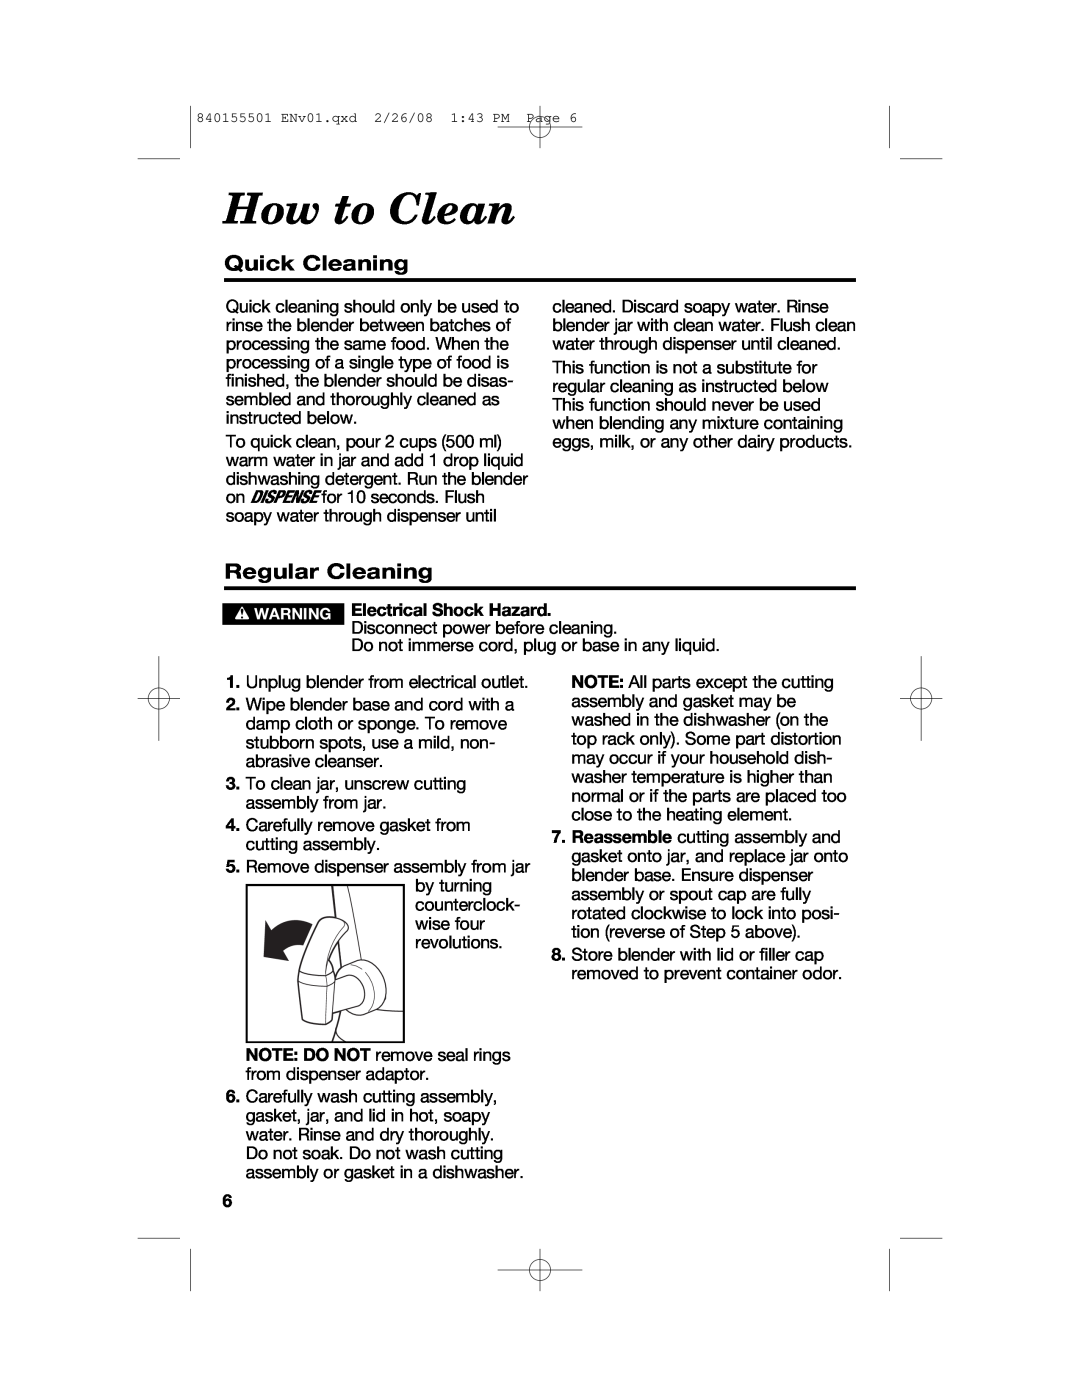 Hamilton Beach 54616C manual How to Clean, Quick Cleaning, Regular Cleaning, w WARNING Electrical Shock Hazard 